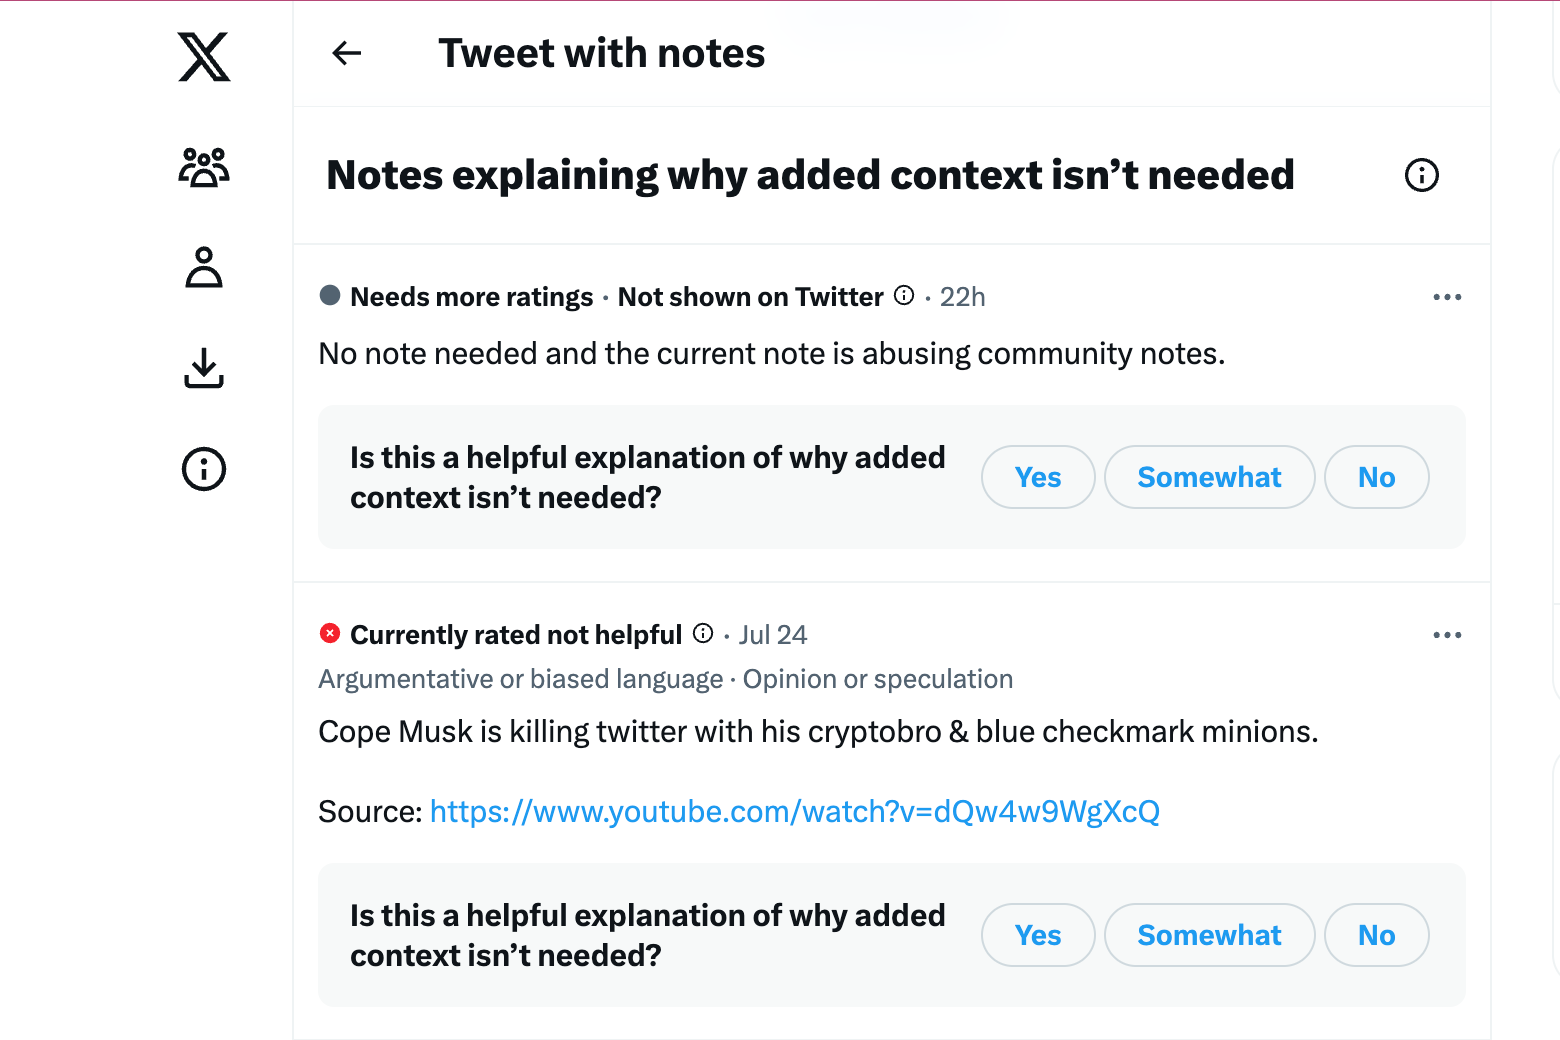 A screenshot of a Community Notes interface showing two suggested Notes beneath a tweet from Linda Yaccarino, one reading "Cope Musk is killing twitter with his cryptobro & blue checkmark minions," the other countering with "No note needed and the current note is abusing community notes."